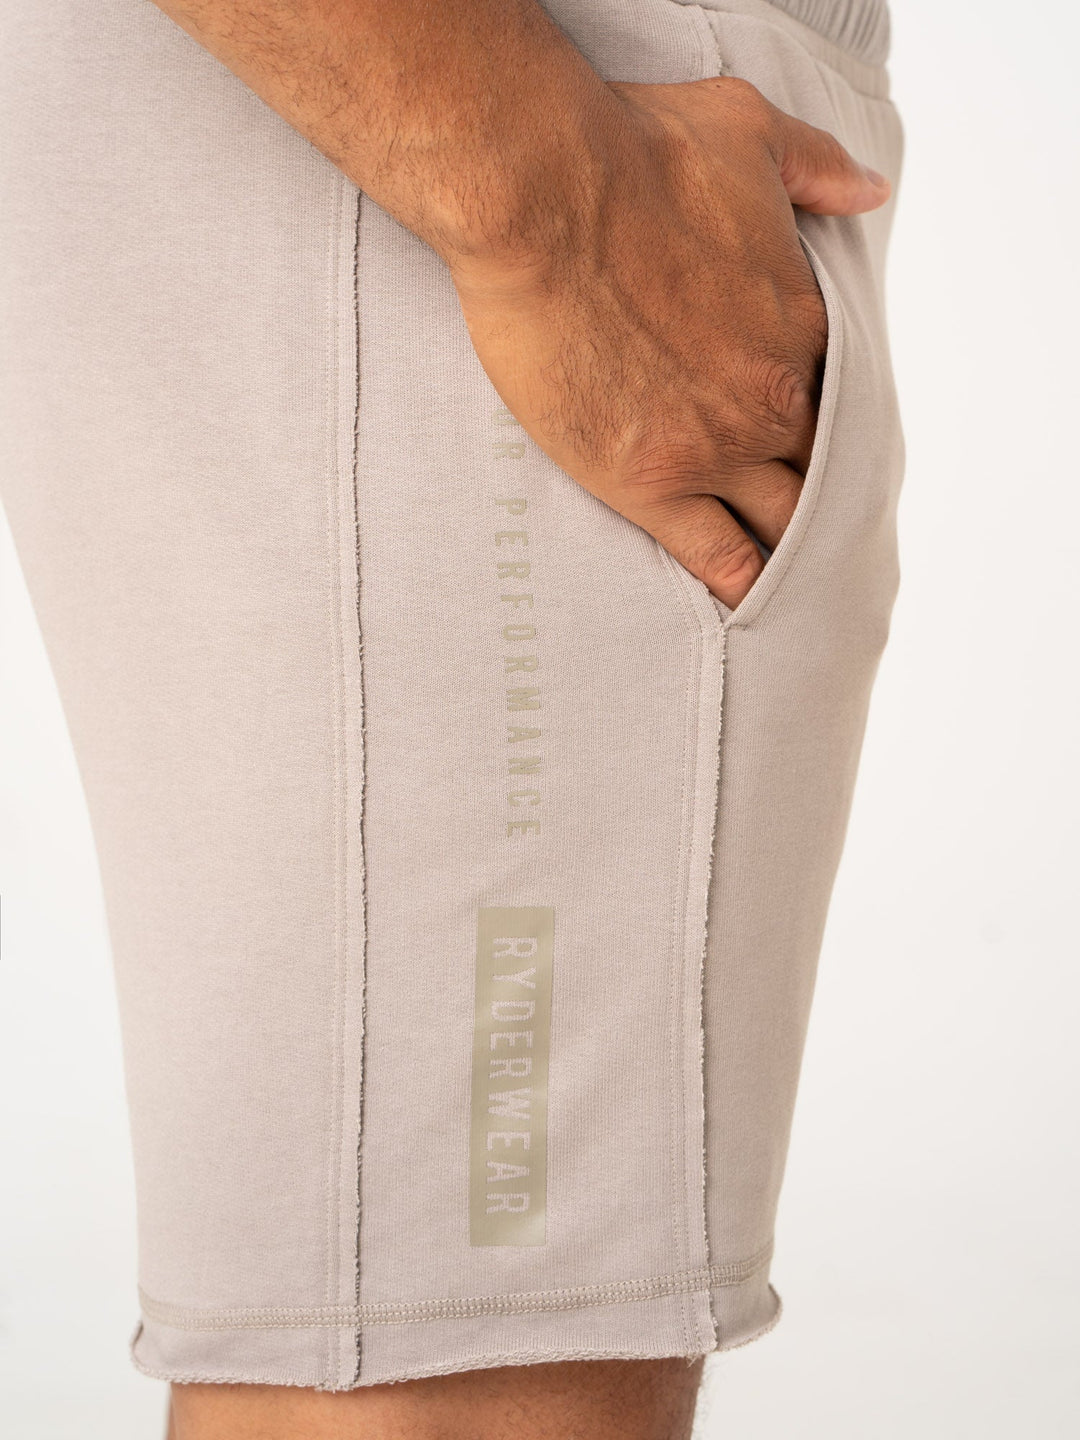 Pursuit Track Shorts - Taupe Clothing Ryderwear 